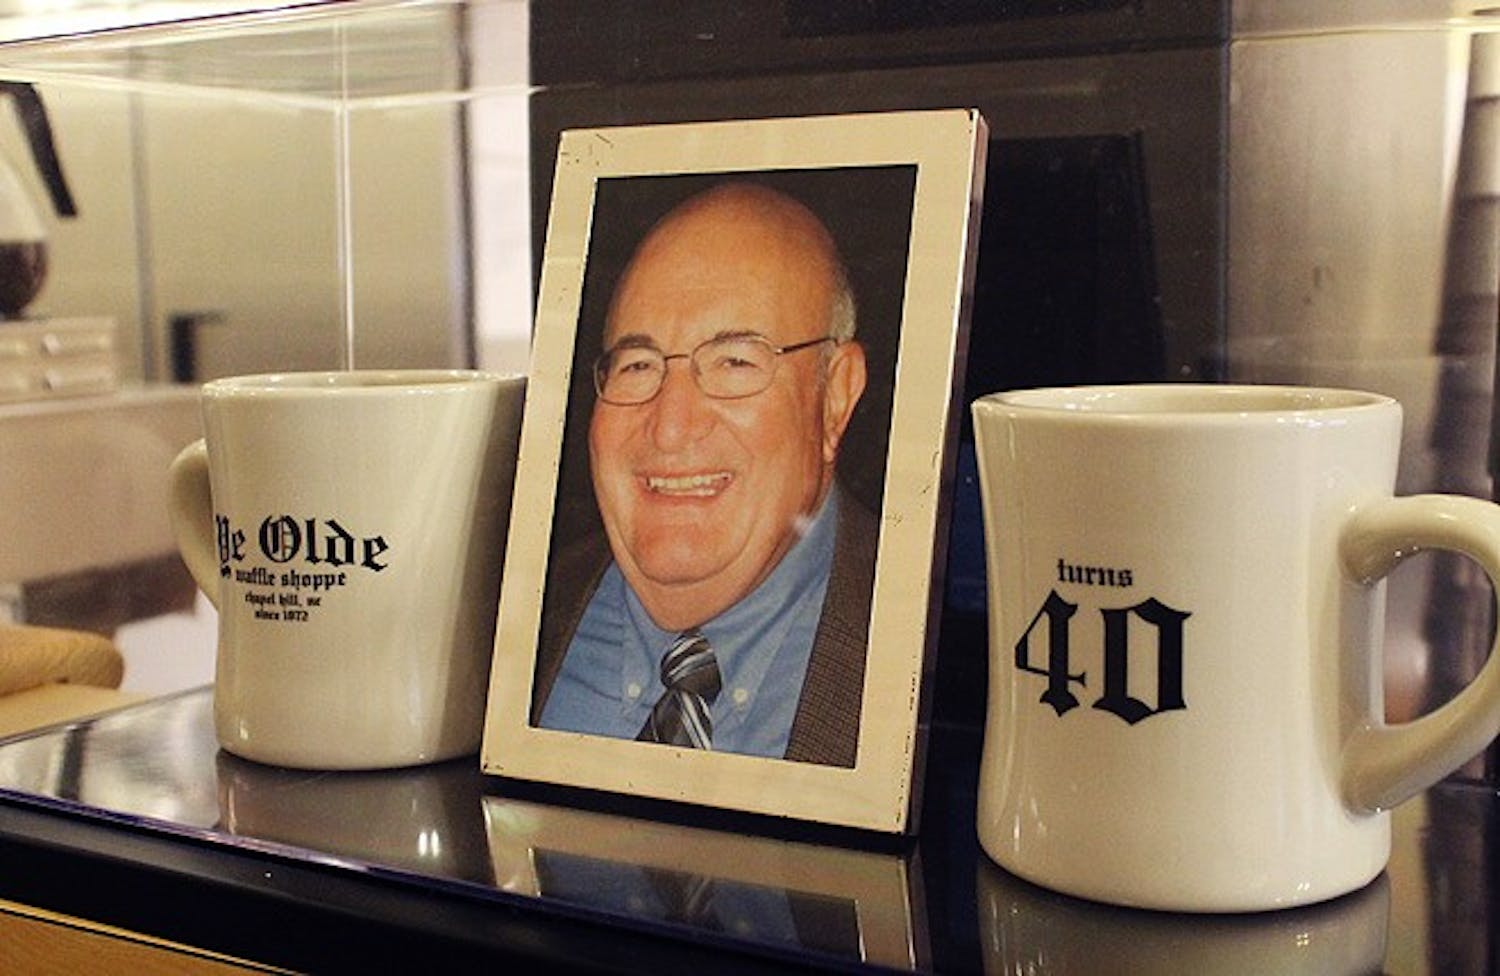 Ye Olde Waffle Shoppe will be celebrating its 40th anniversary tomorrow, with prices going back down to how they were in 1972. The Shoppe displays mugs they will be raffling off in commemoration of their anniversary, shown beside the owner. 